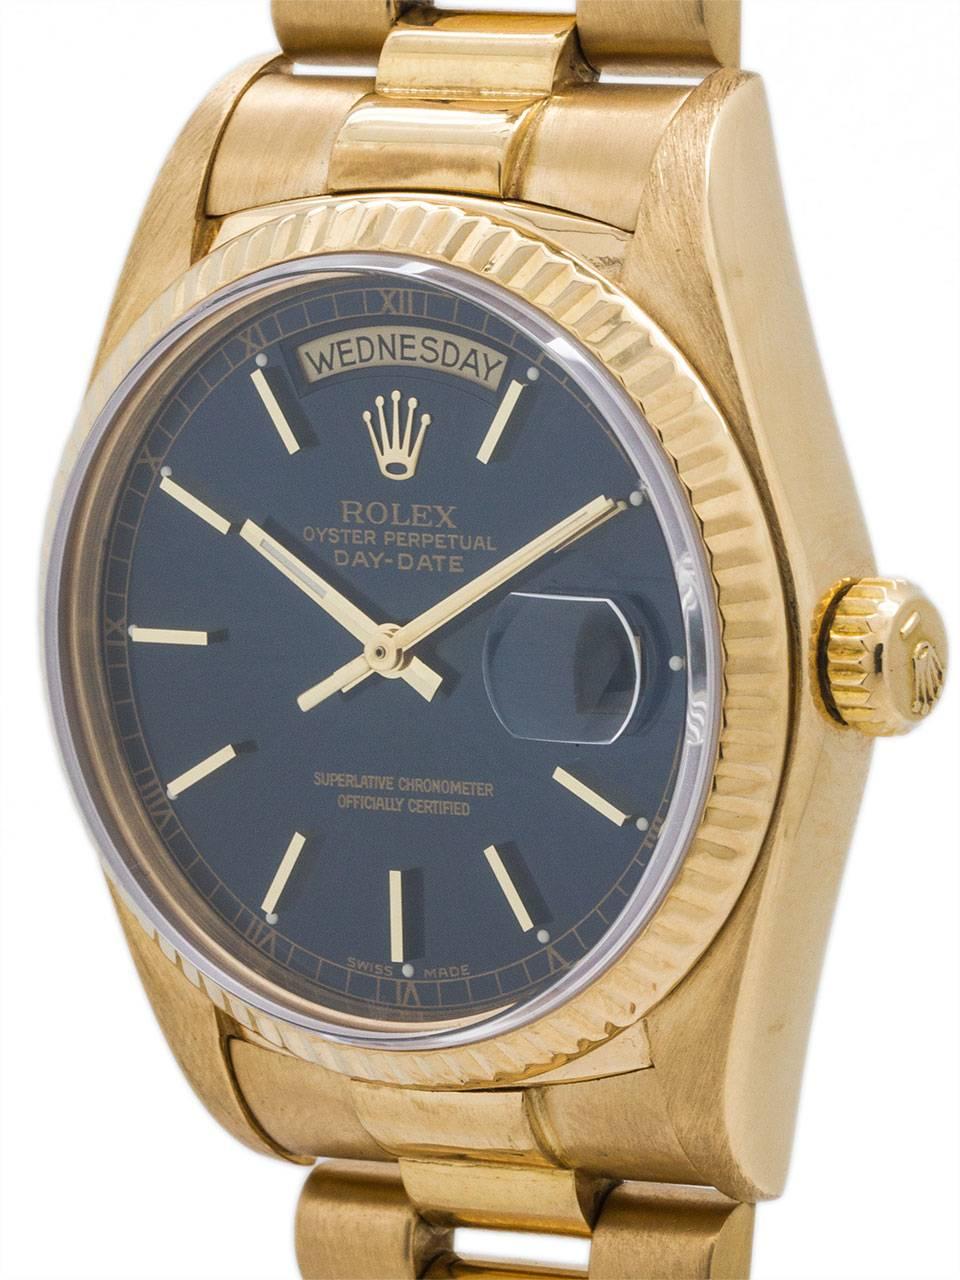 Rolex 18K Yellow Gold Day Date President ref 18038 serial no 9.8 million circa 1987. Featuring 36mm full size man’s model with fluted bezel, sapphire crystal and screw down crown. Lovely blue dial with applied gold indexes and gilt baton hands.